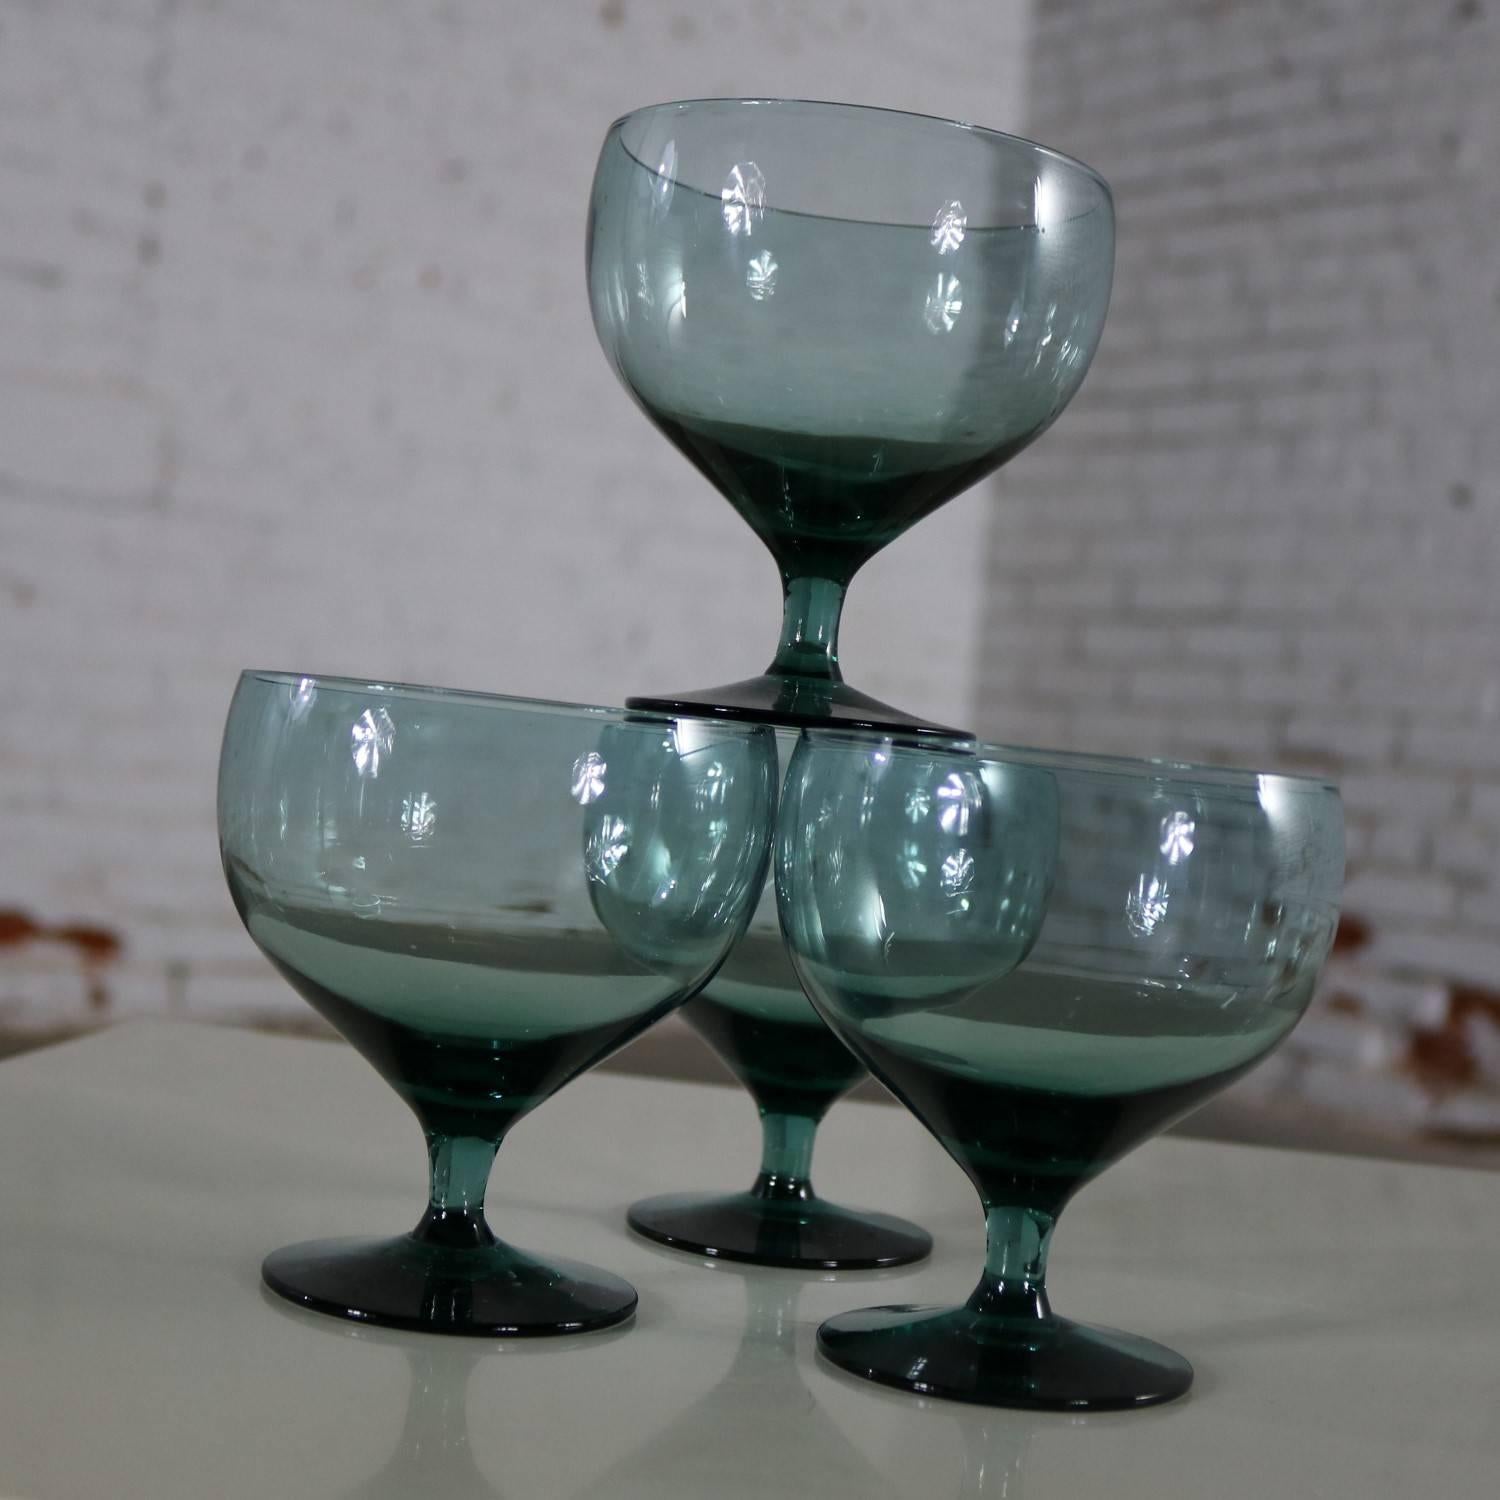 Handsome set of four Mid-Century Modern Morgantown American Modern seafoam blue-green champagne coupes or goblets by Russel Wright. This vintage set is in fabulous condition with no chips, cracks or chiggers, circa 1950s

Fantastic set of four